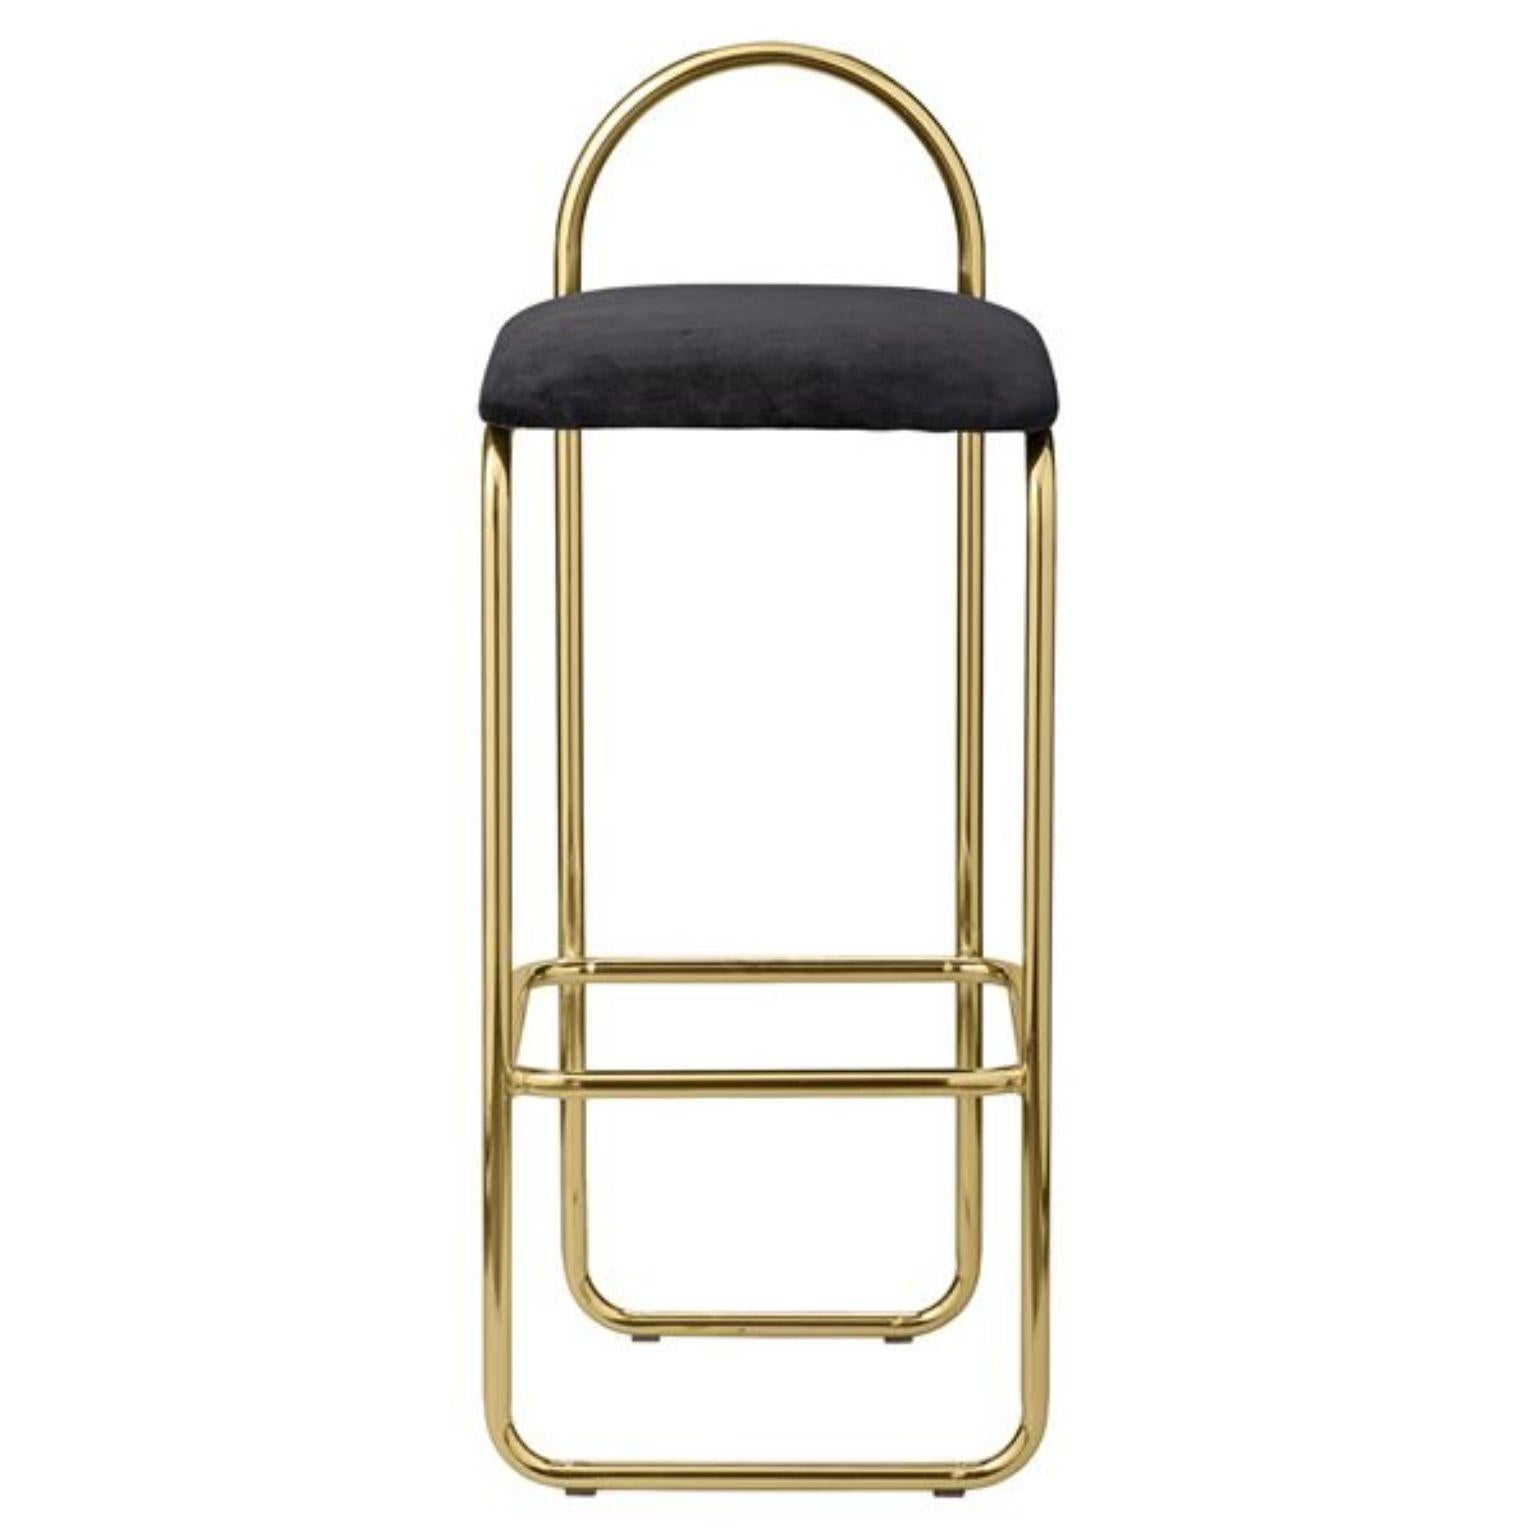 Anthracite velvet and gold Minimalist bar chair 92.5
Dimensions: L 37 x W 39 x H 92.5 cm
Materials: Velvet and steel

The collection includes benches, chairs, shelves and mirrors in a wide variety of sizes.